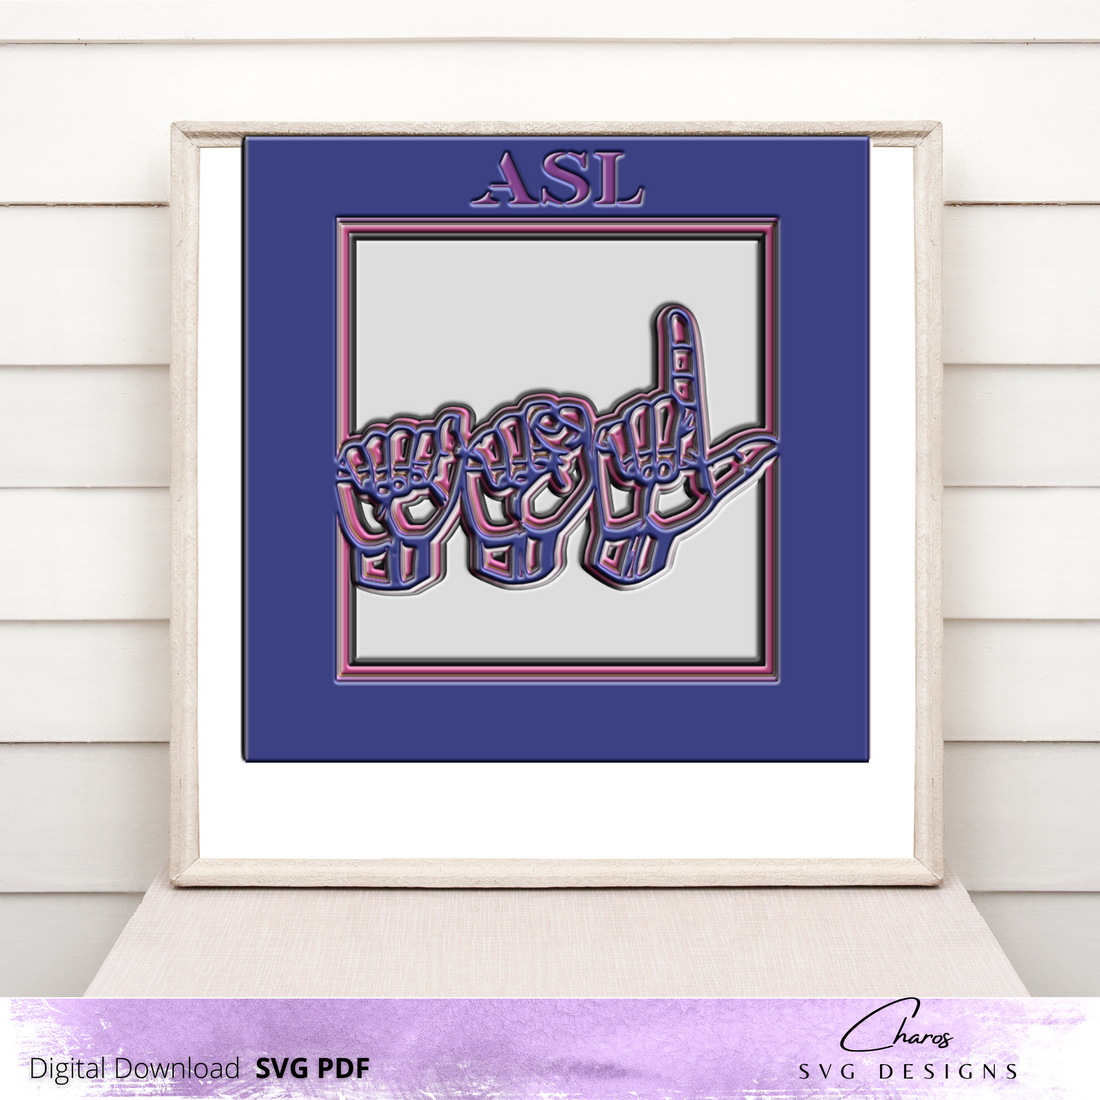 ASL (American Sign Language) 3D Shadow Box SVG | ASL | Sign Language | Deaf | Deaf Awareness | Signing | | Cricut | Cameo | Cutting File